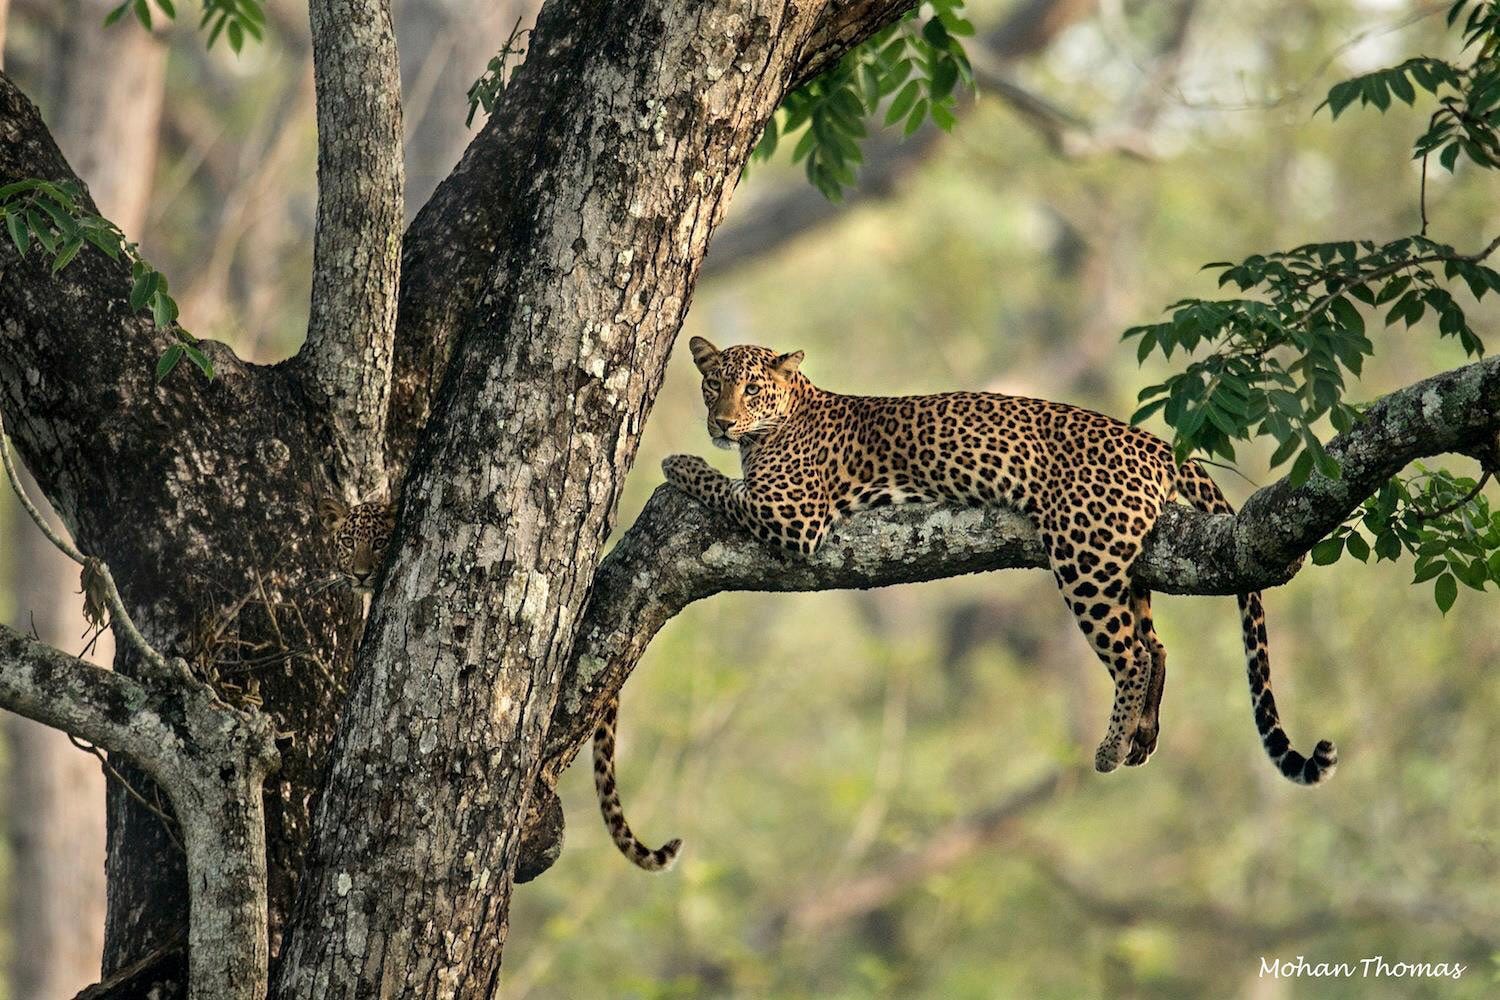 A leopard sitting in a tree with a baby leopard hiding in the trunk